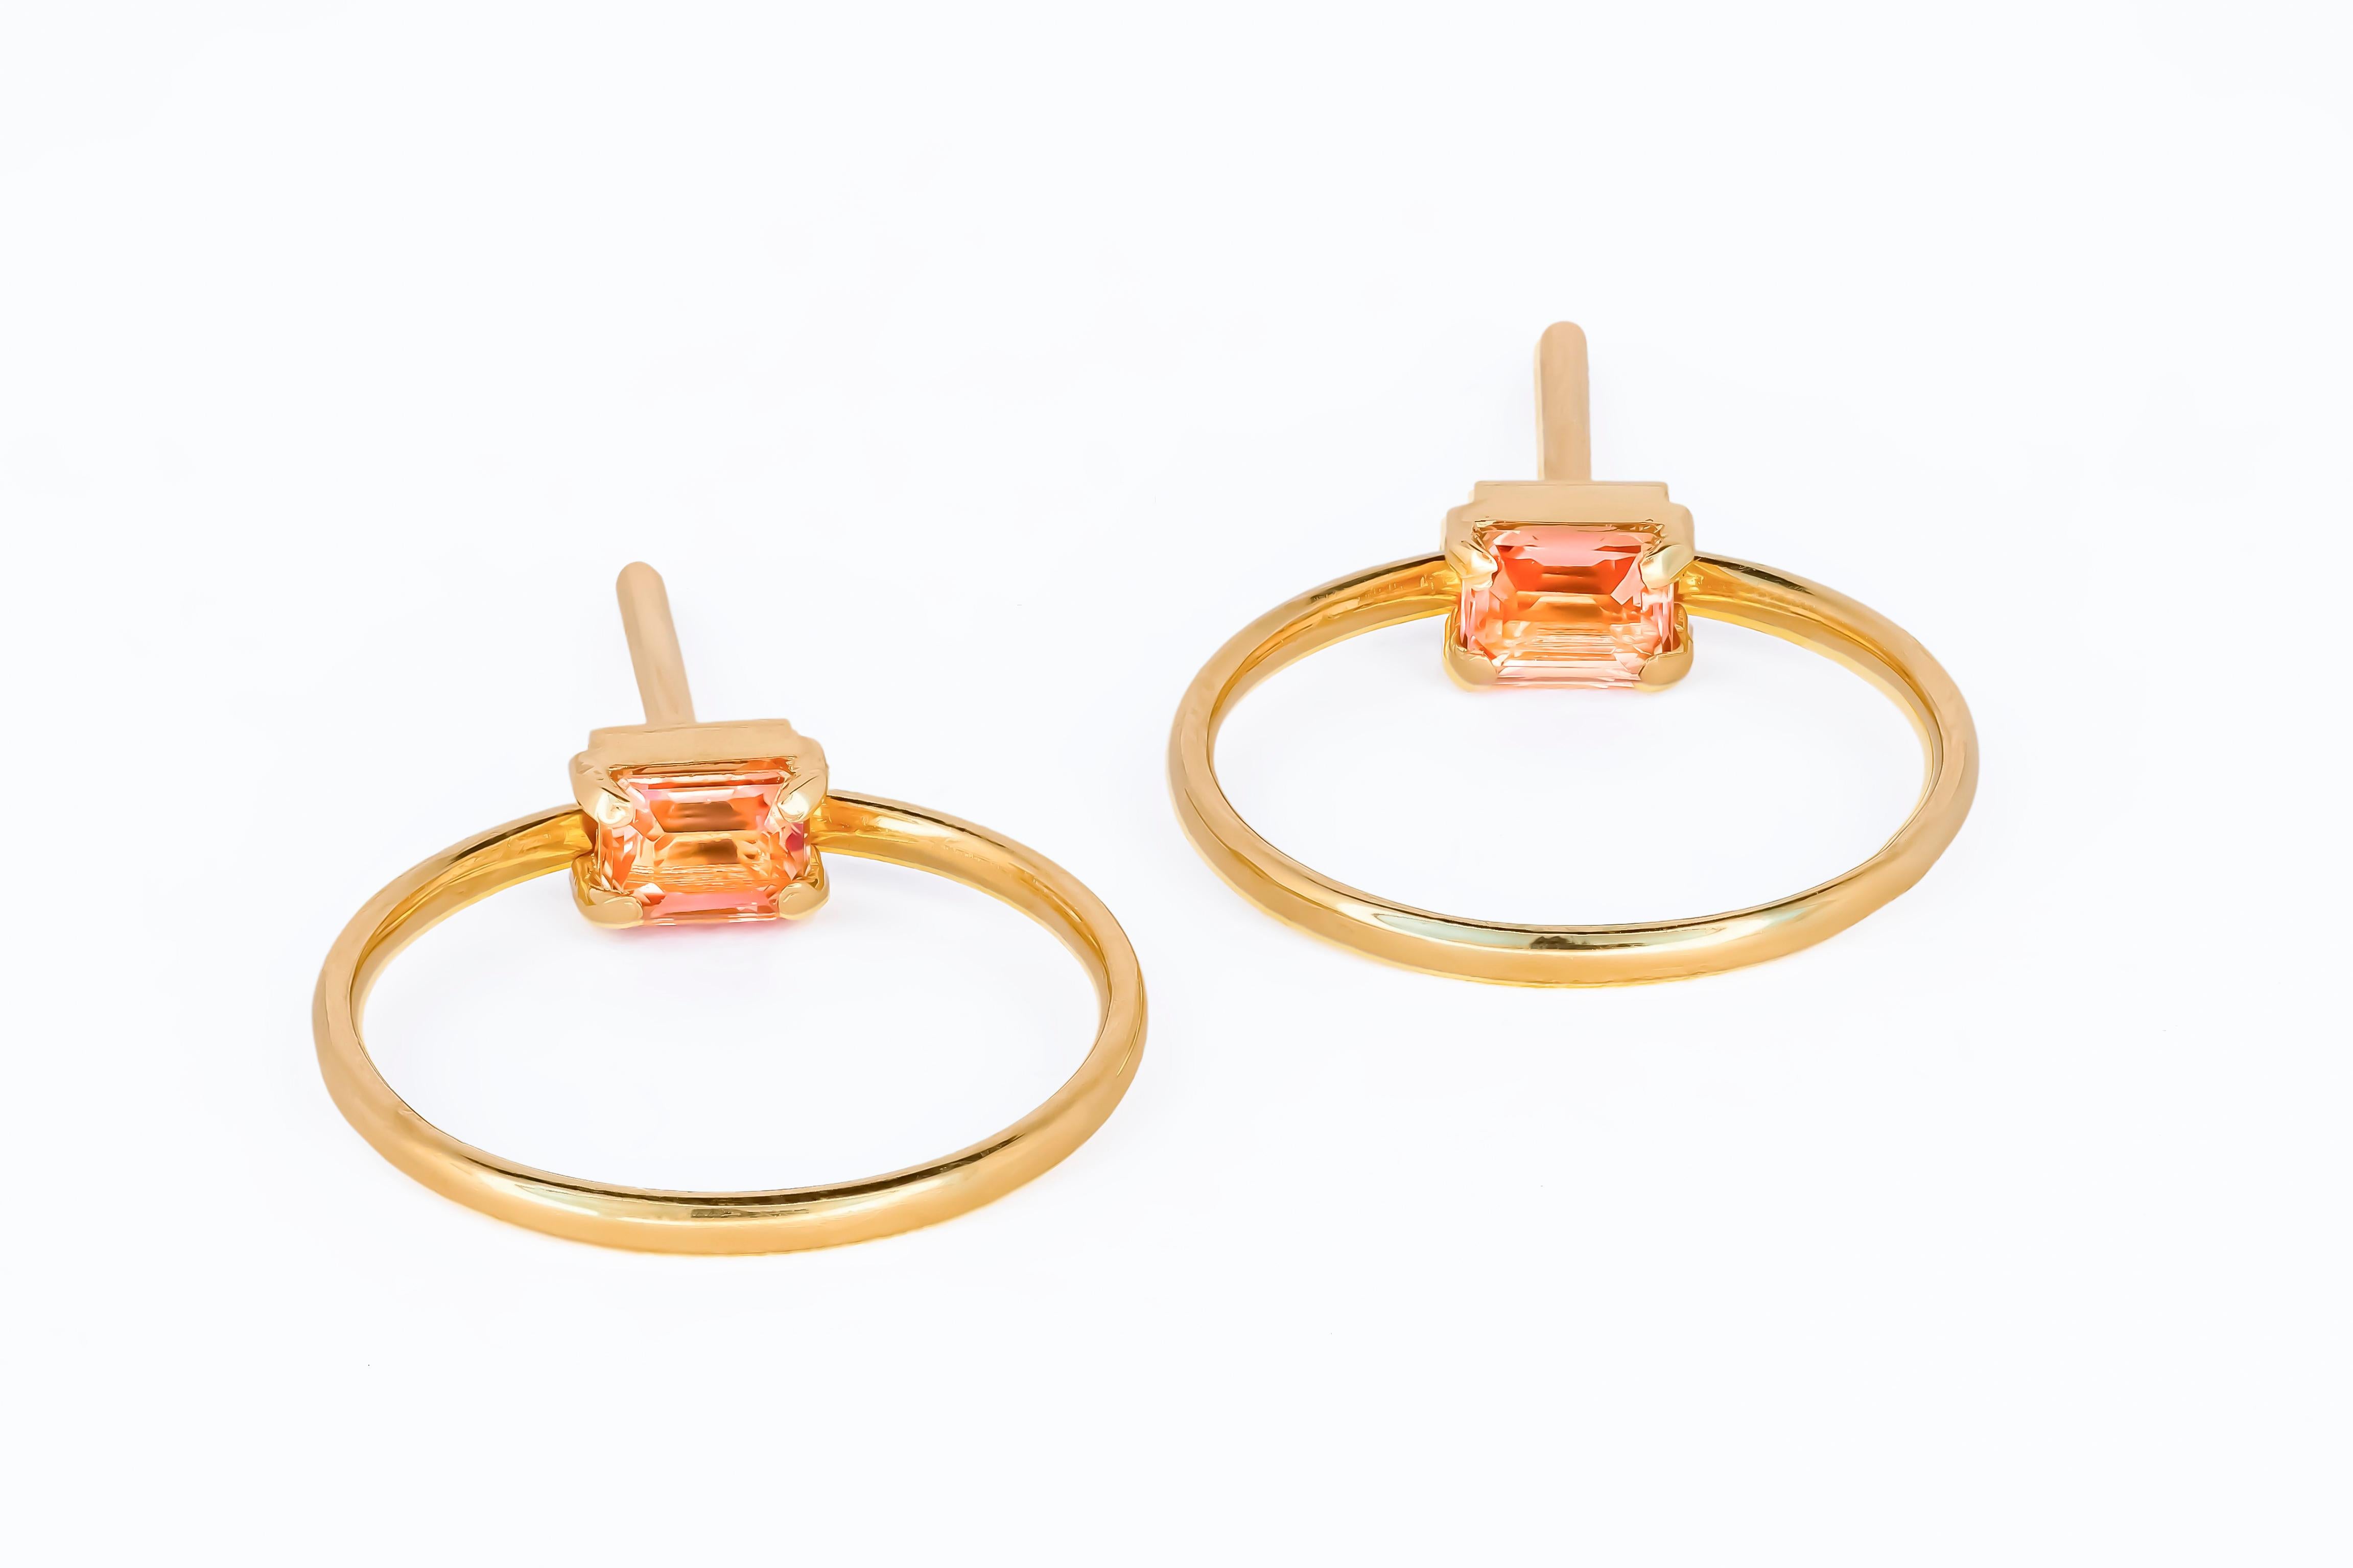 14 karat gold earrings studs with genuine sapphires. September birthstone. Genuine sapphire earrings
Metal: 14 karat gold
Weight: 2.1 g.
Size: 16.5 x 16.5 mm.
Set with genuine sapphires: weight - 0.20 ct x 2 = 0.40 ct total.
Peach-pink color,